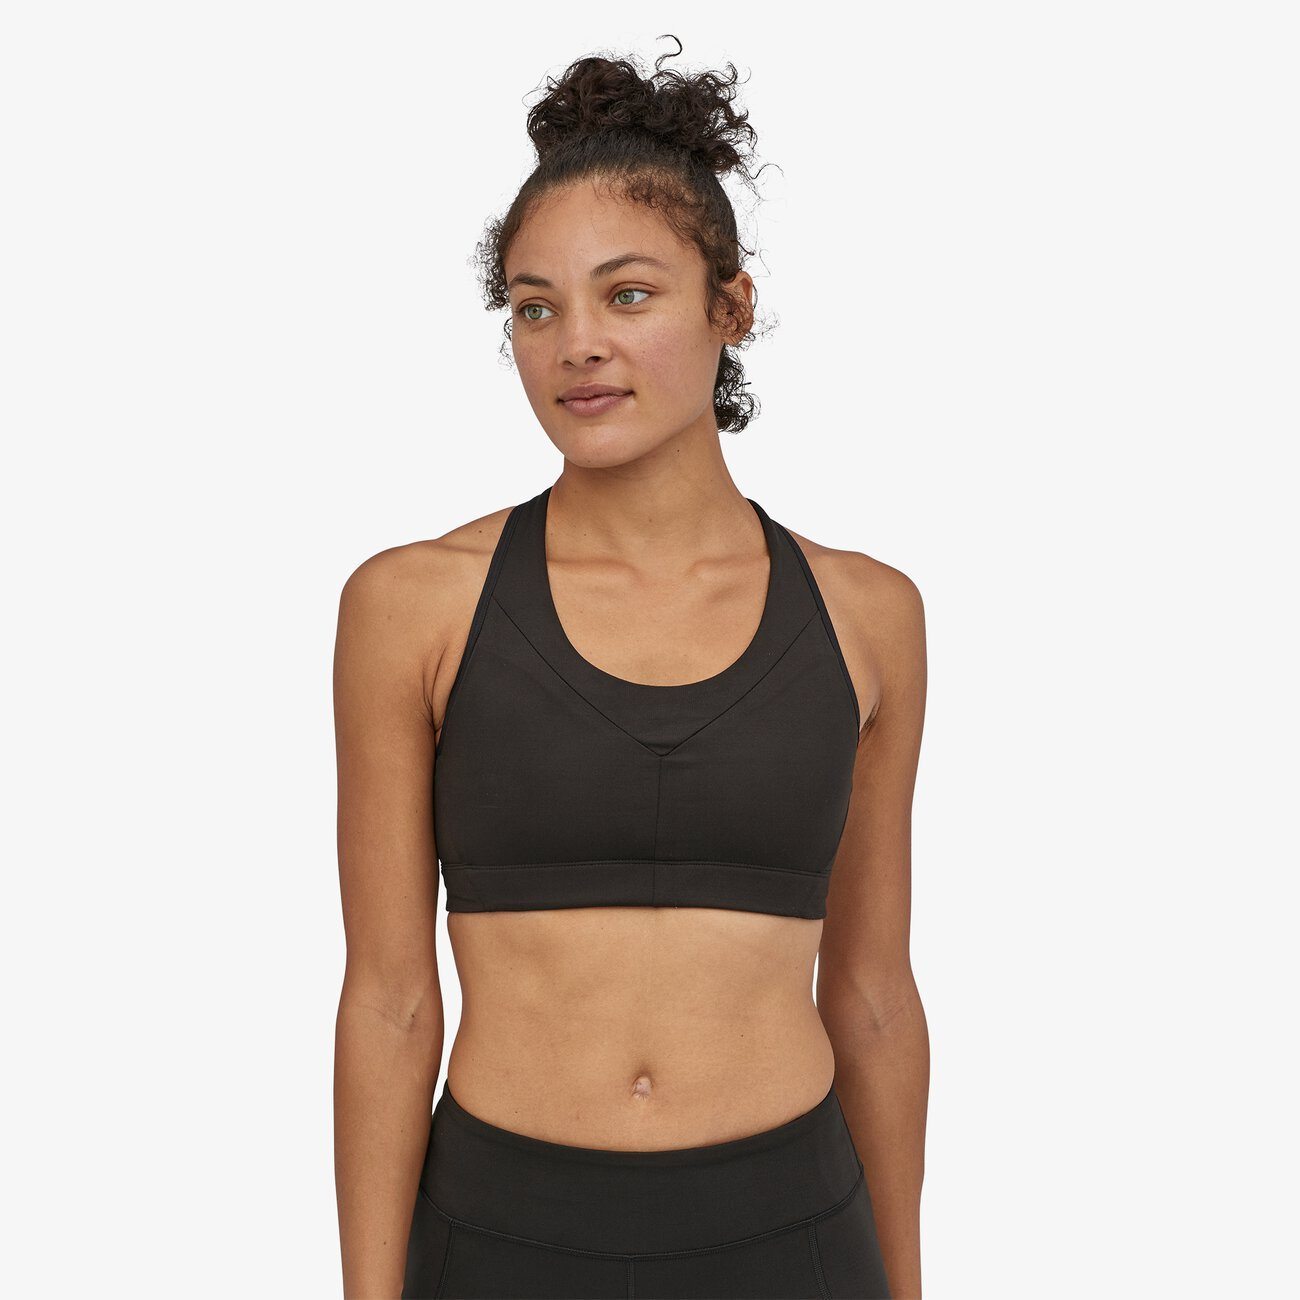 Patagonia Women's Wild Trails Sports Bra - Recycled Polyester, Black / XS